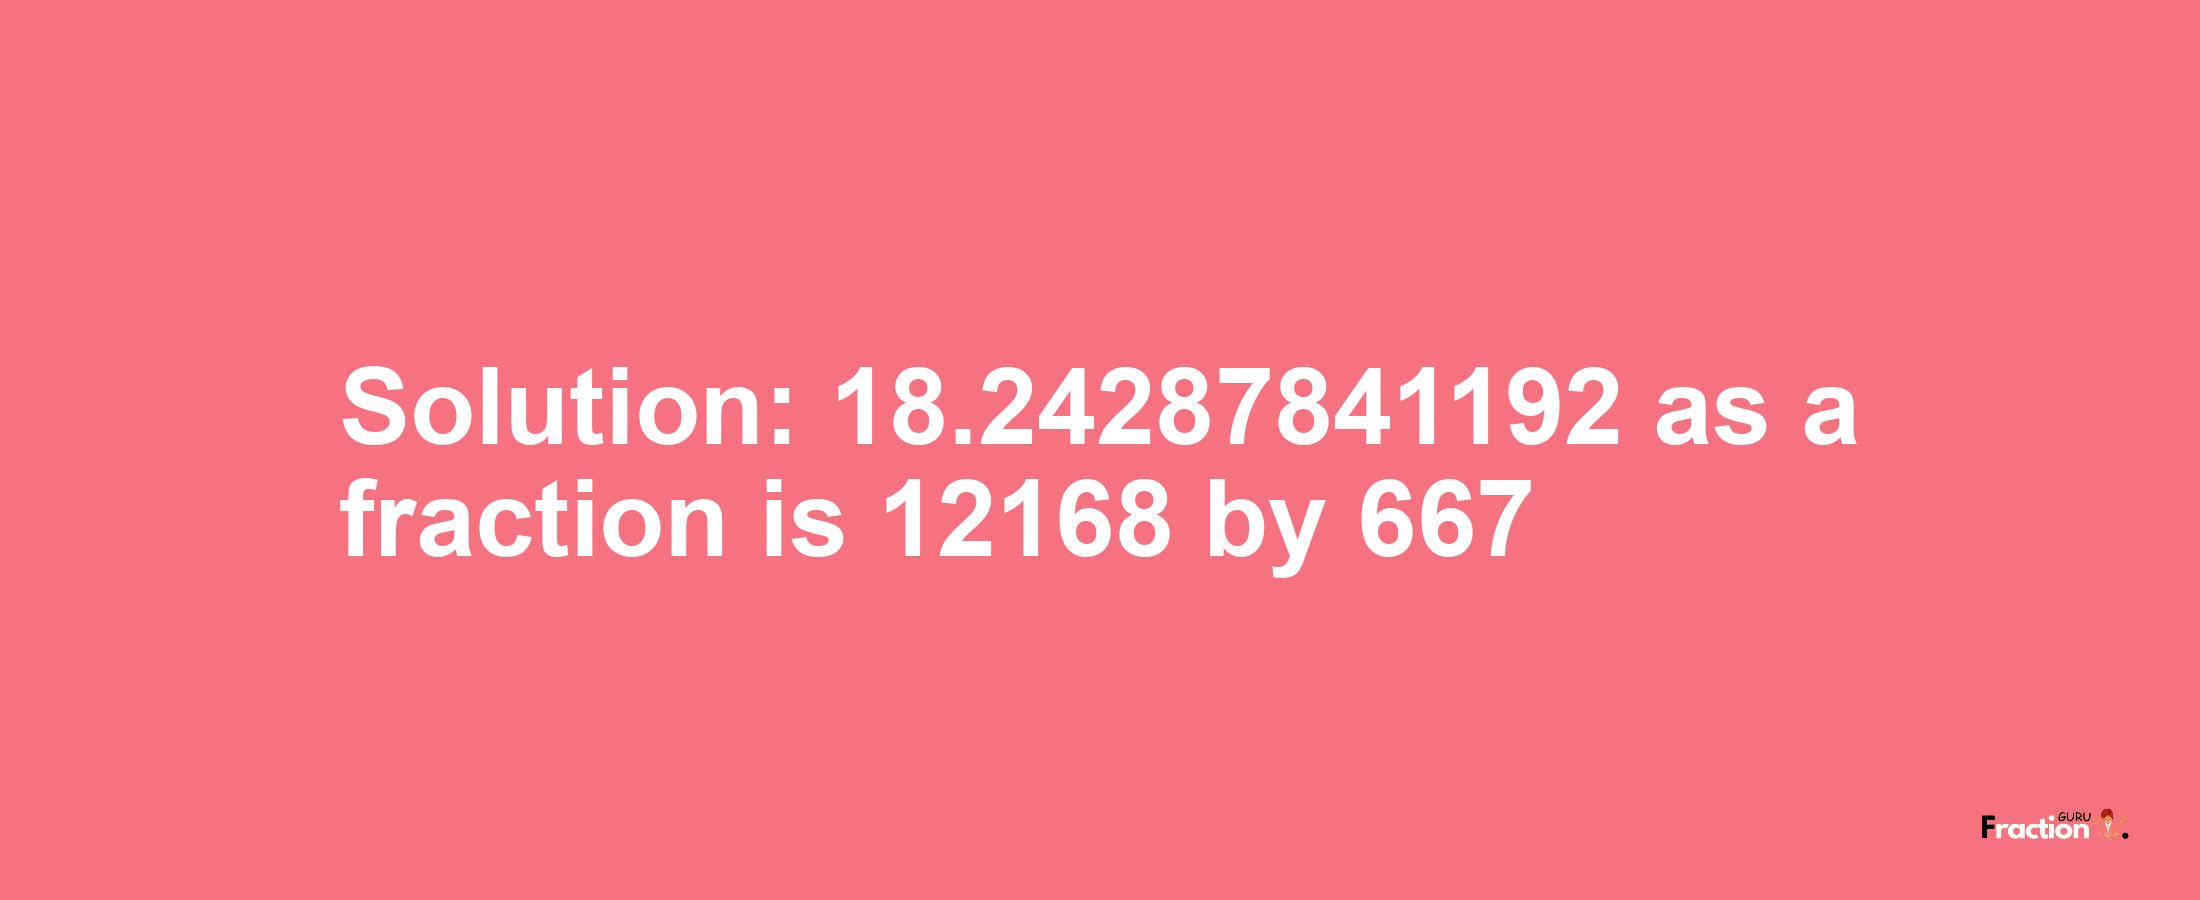 Solution:18.24287841192 as a fraction is 12168/667